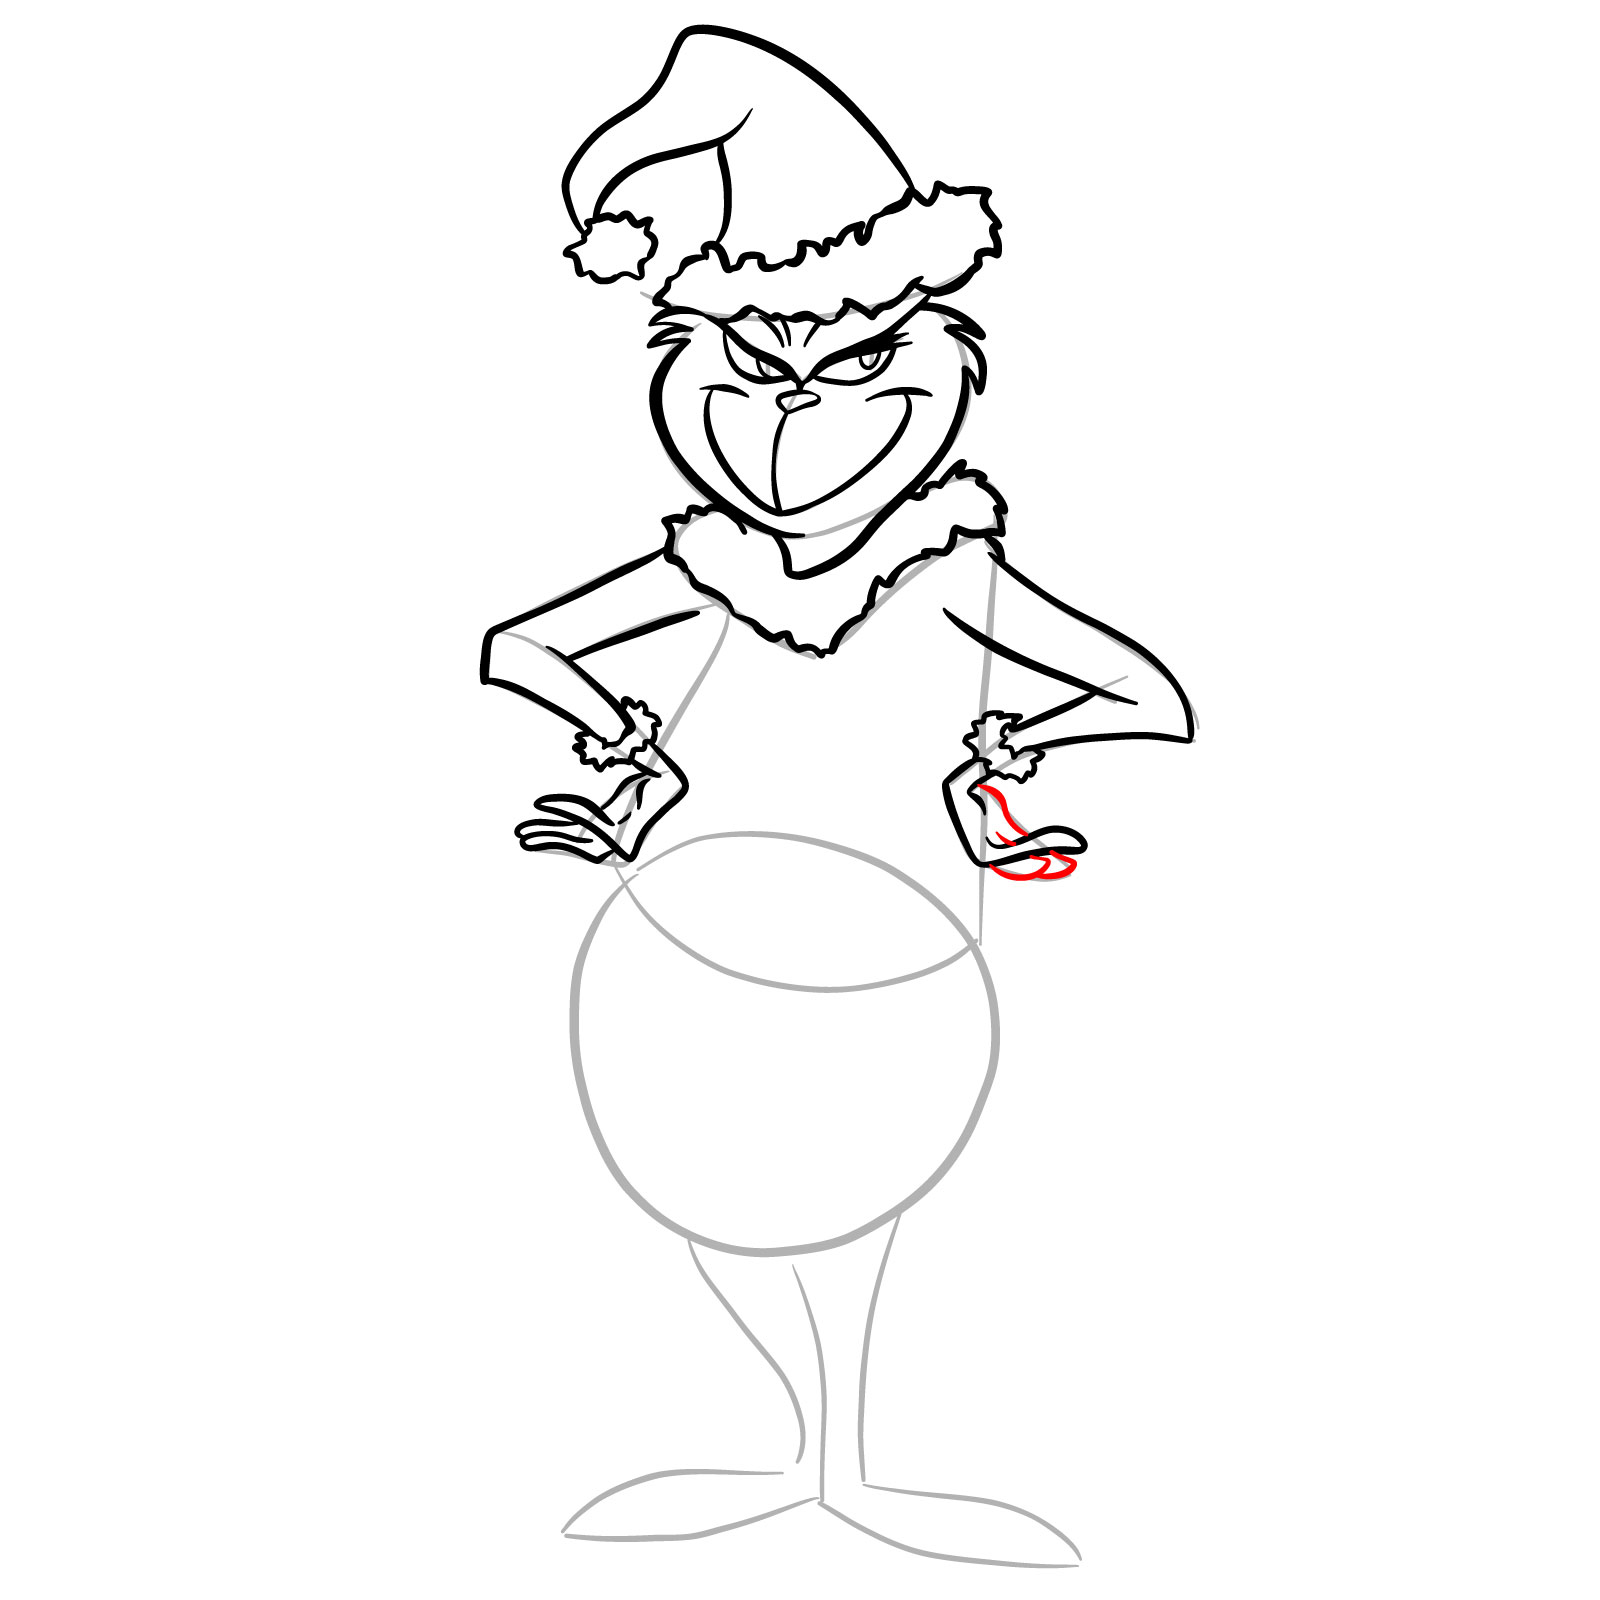 How to draw The Grinch in a Christmas costume - step 20